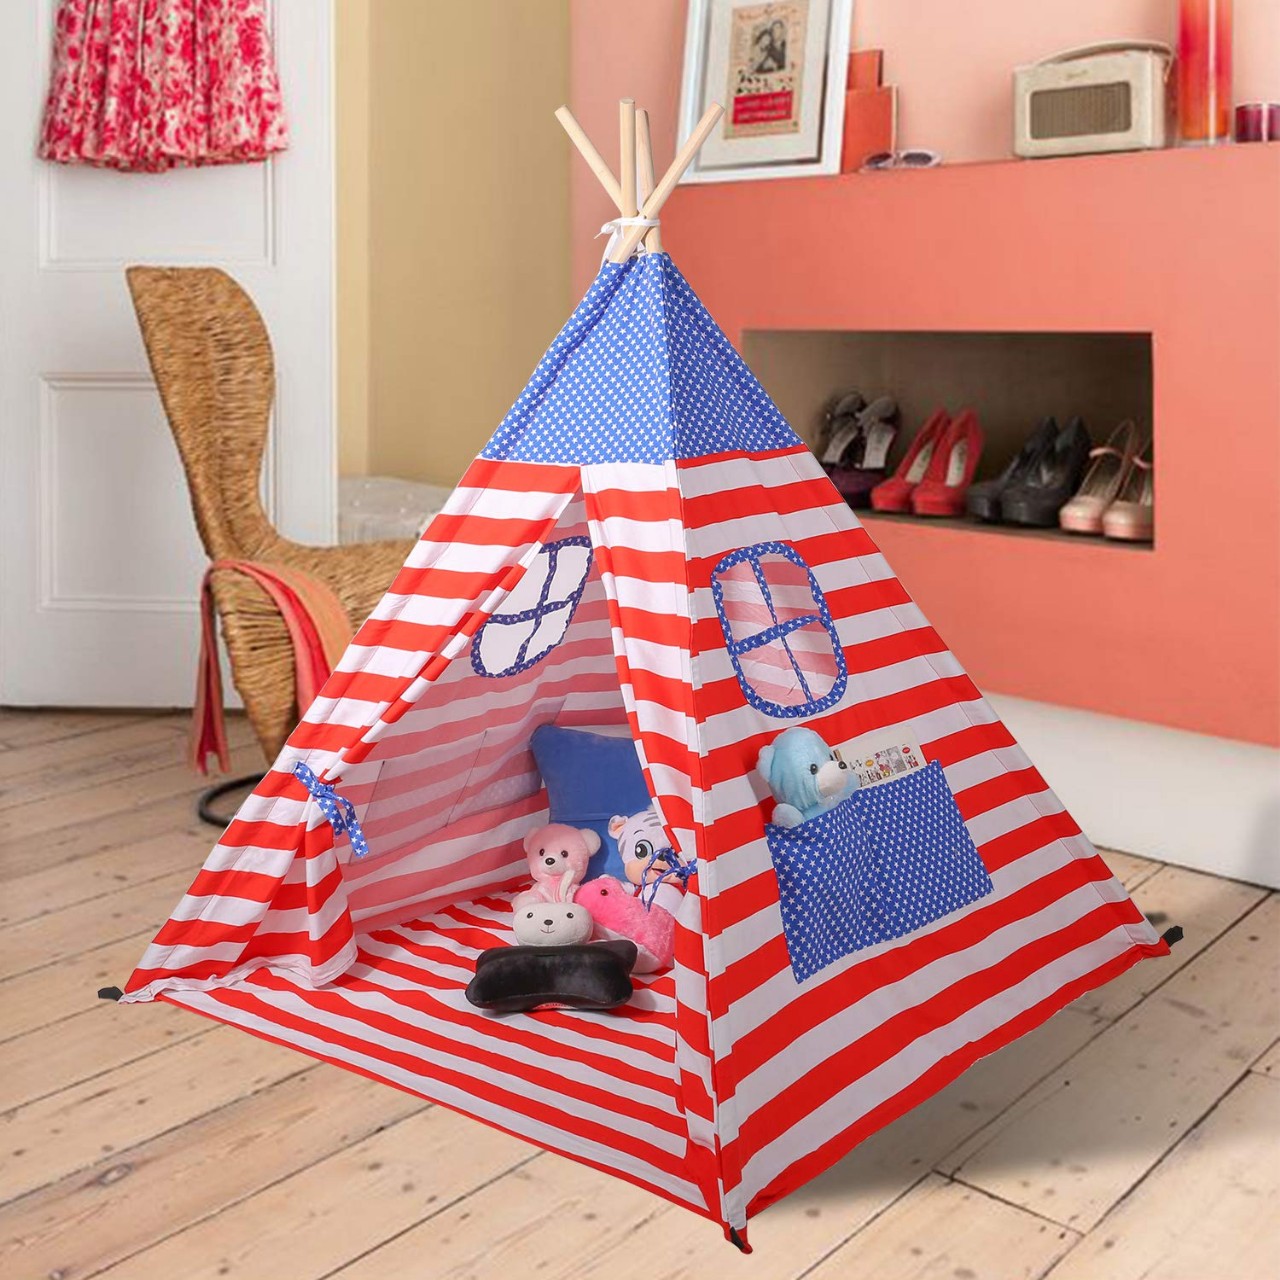 Teepee Tent for Kids ，Indian Play Tent，Children Play Tent with Carry Case for Indoor Outdoor，Sturdy